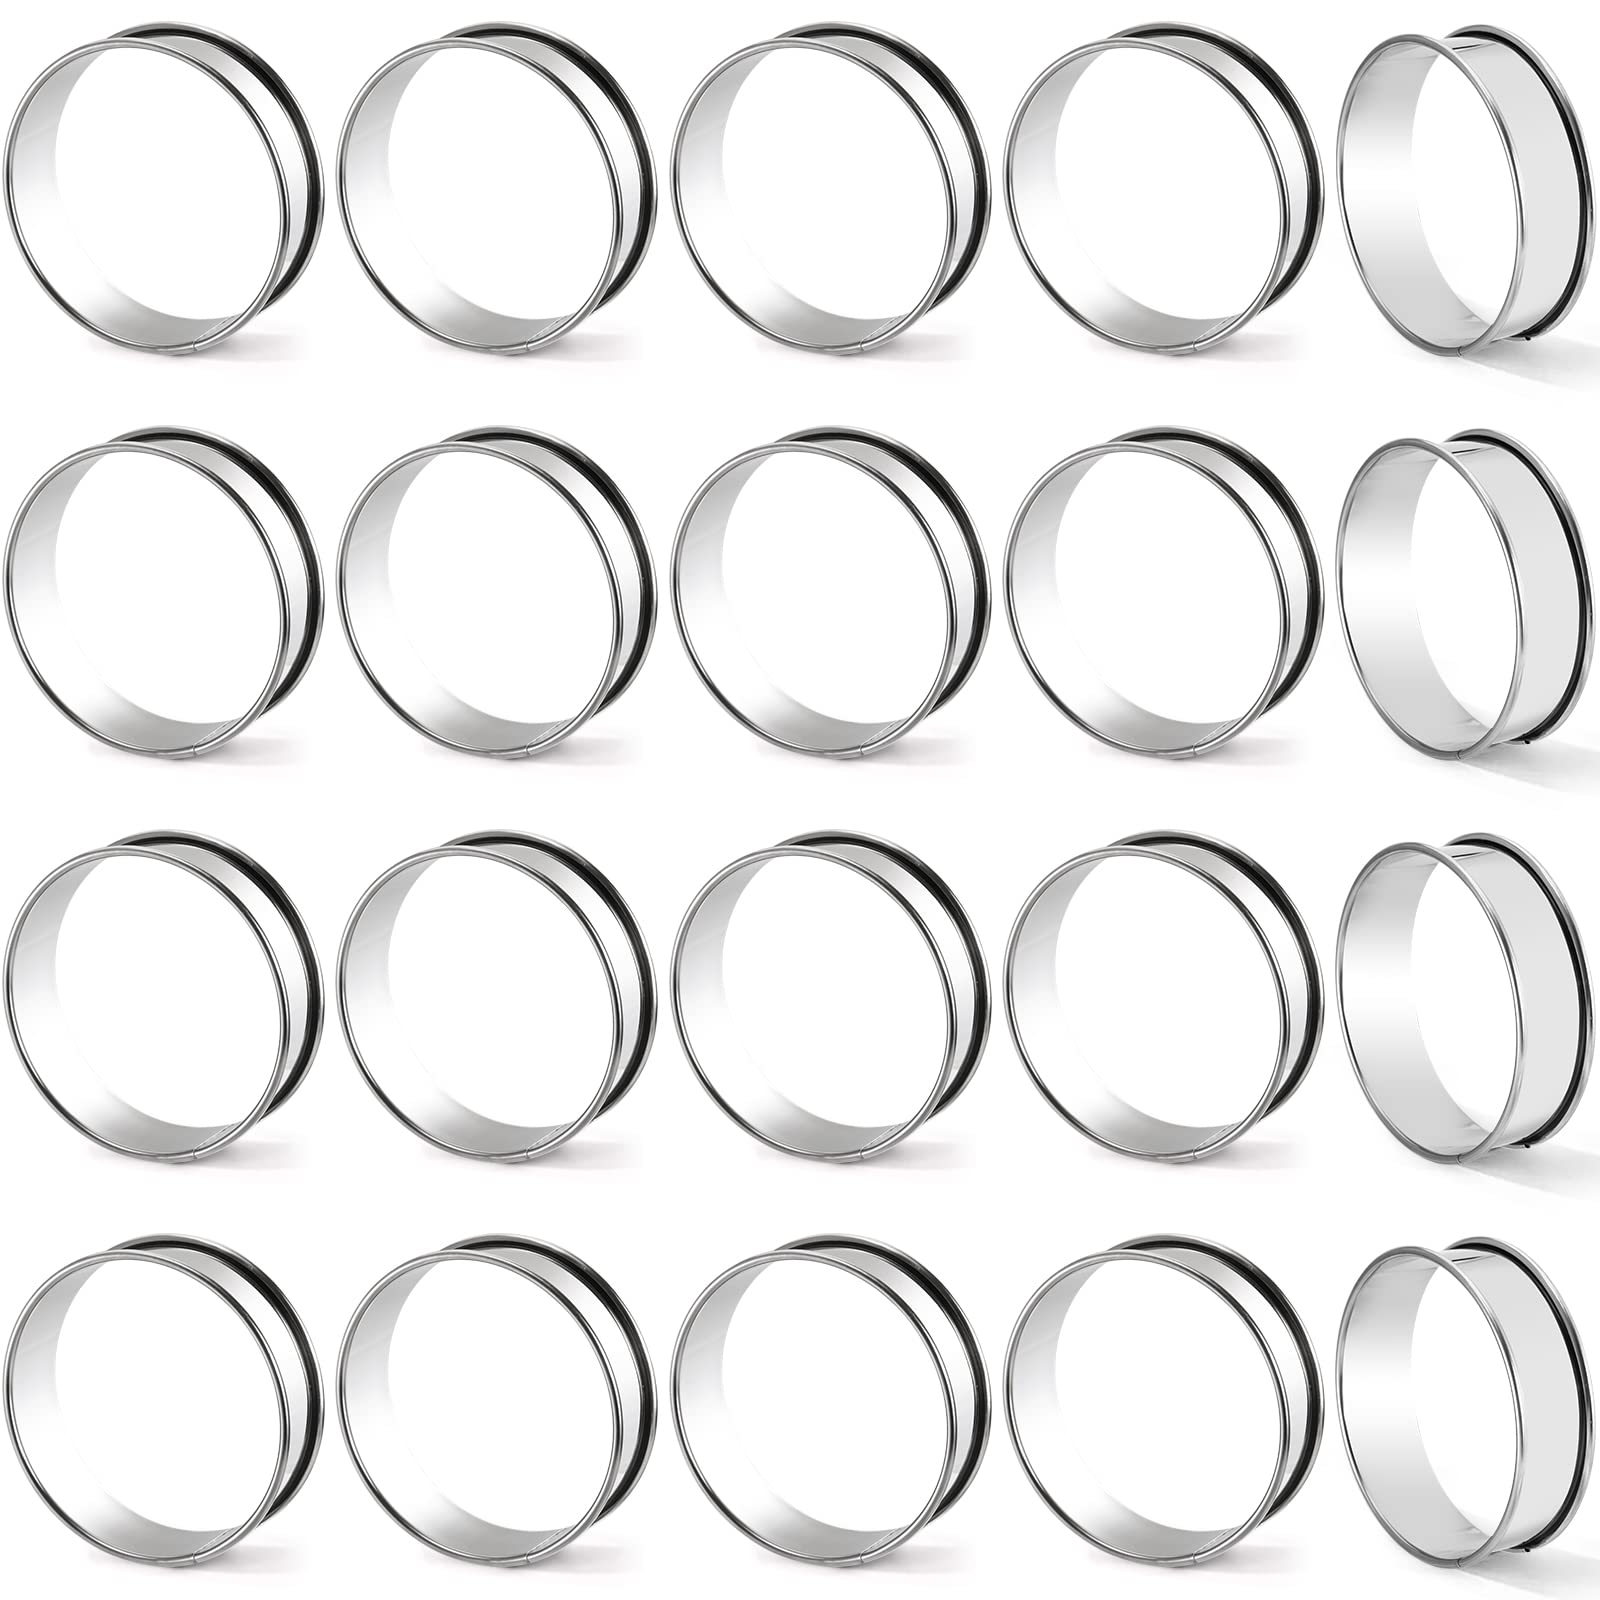 Lyellfe 20 Pieces English Muffin Rings, Stainless Steel Crumpet Rings, 3 Inch Double Rolled Nonstick Muffin Tart Ring Mold for Home Baking, Food Making